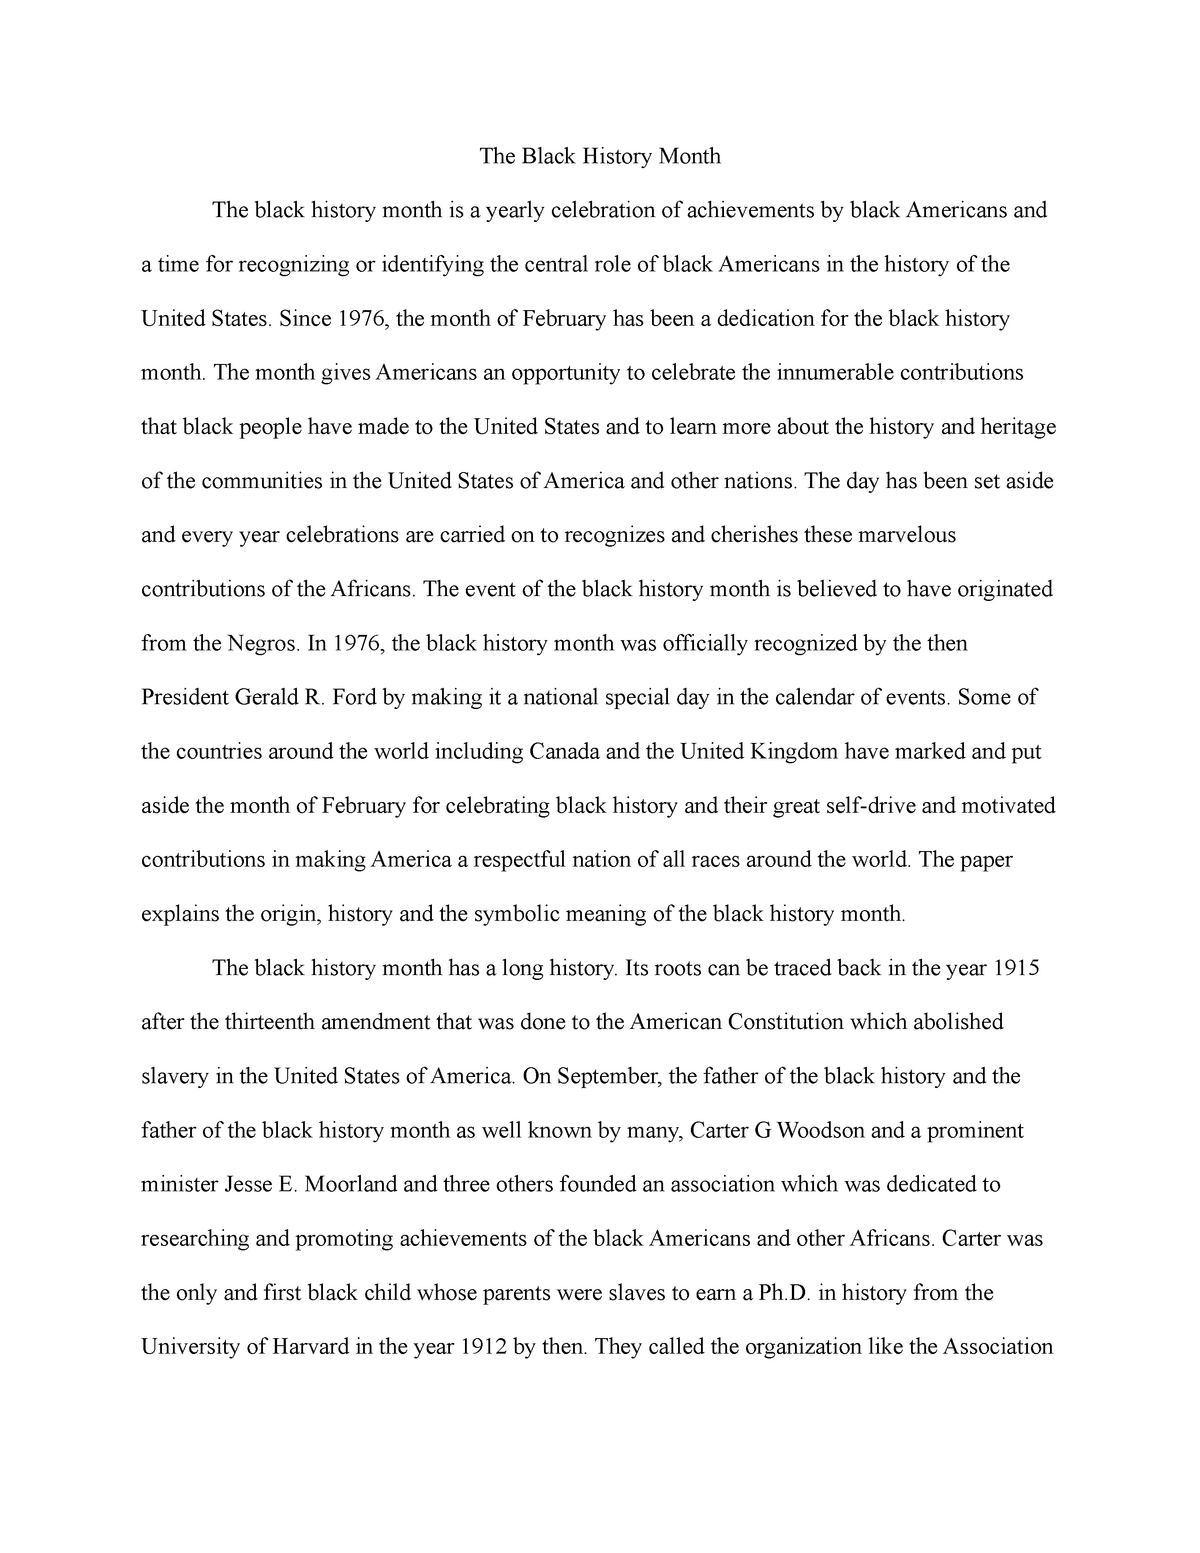 Essay on Black History Month - The Black History Month The black ...